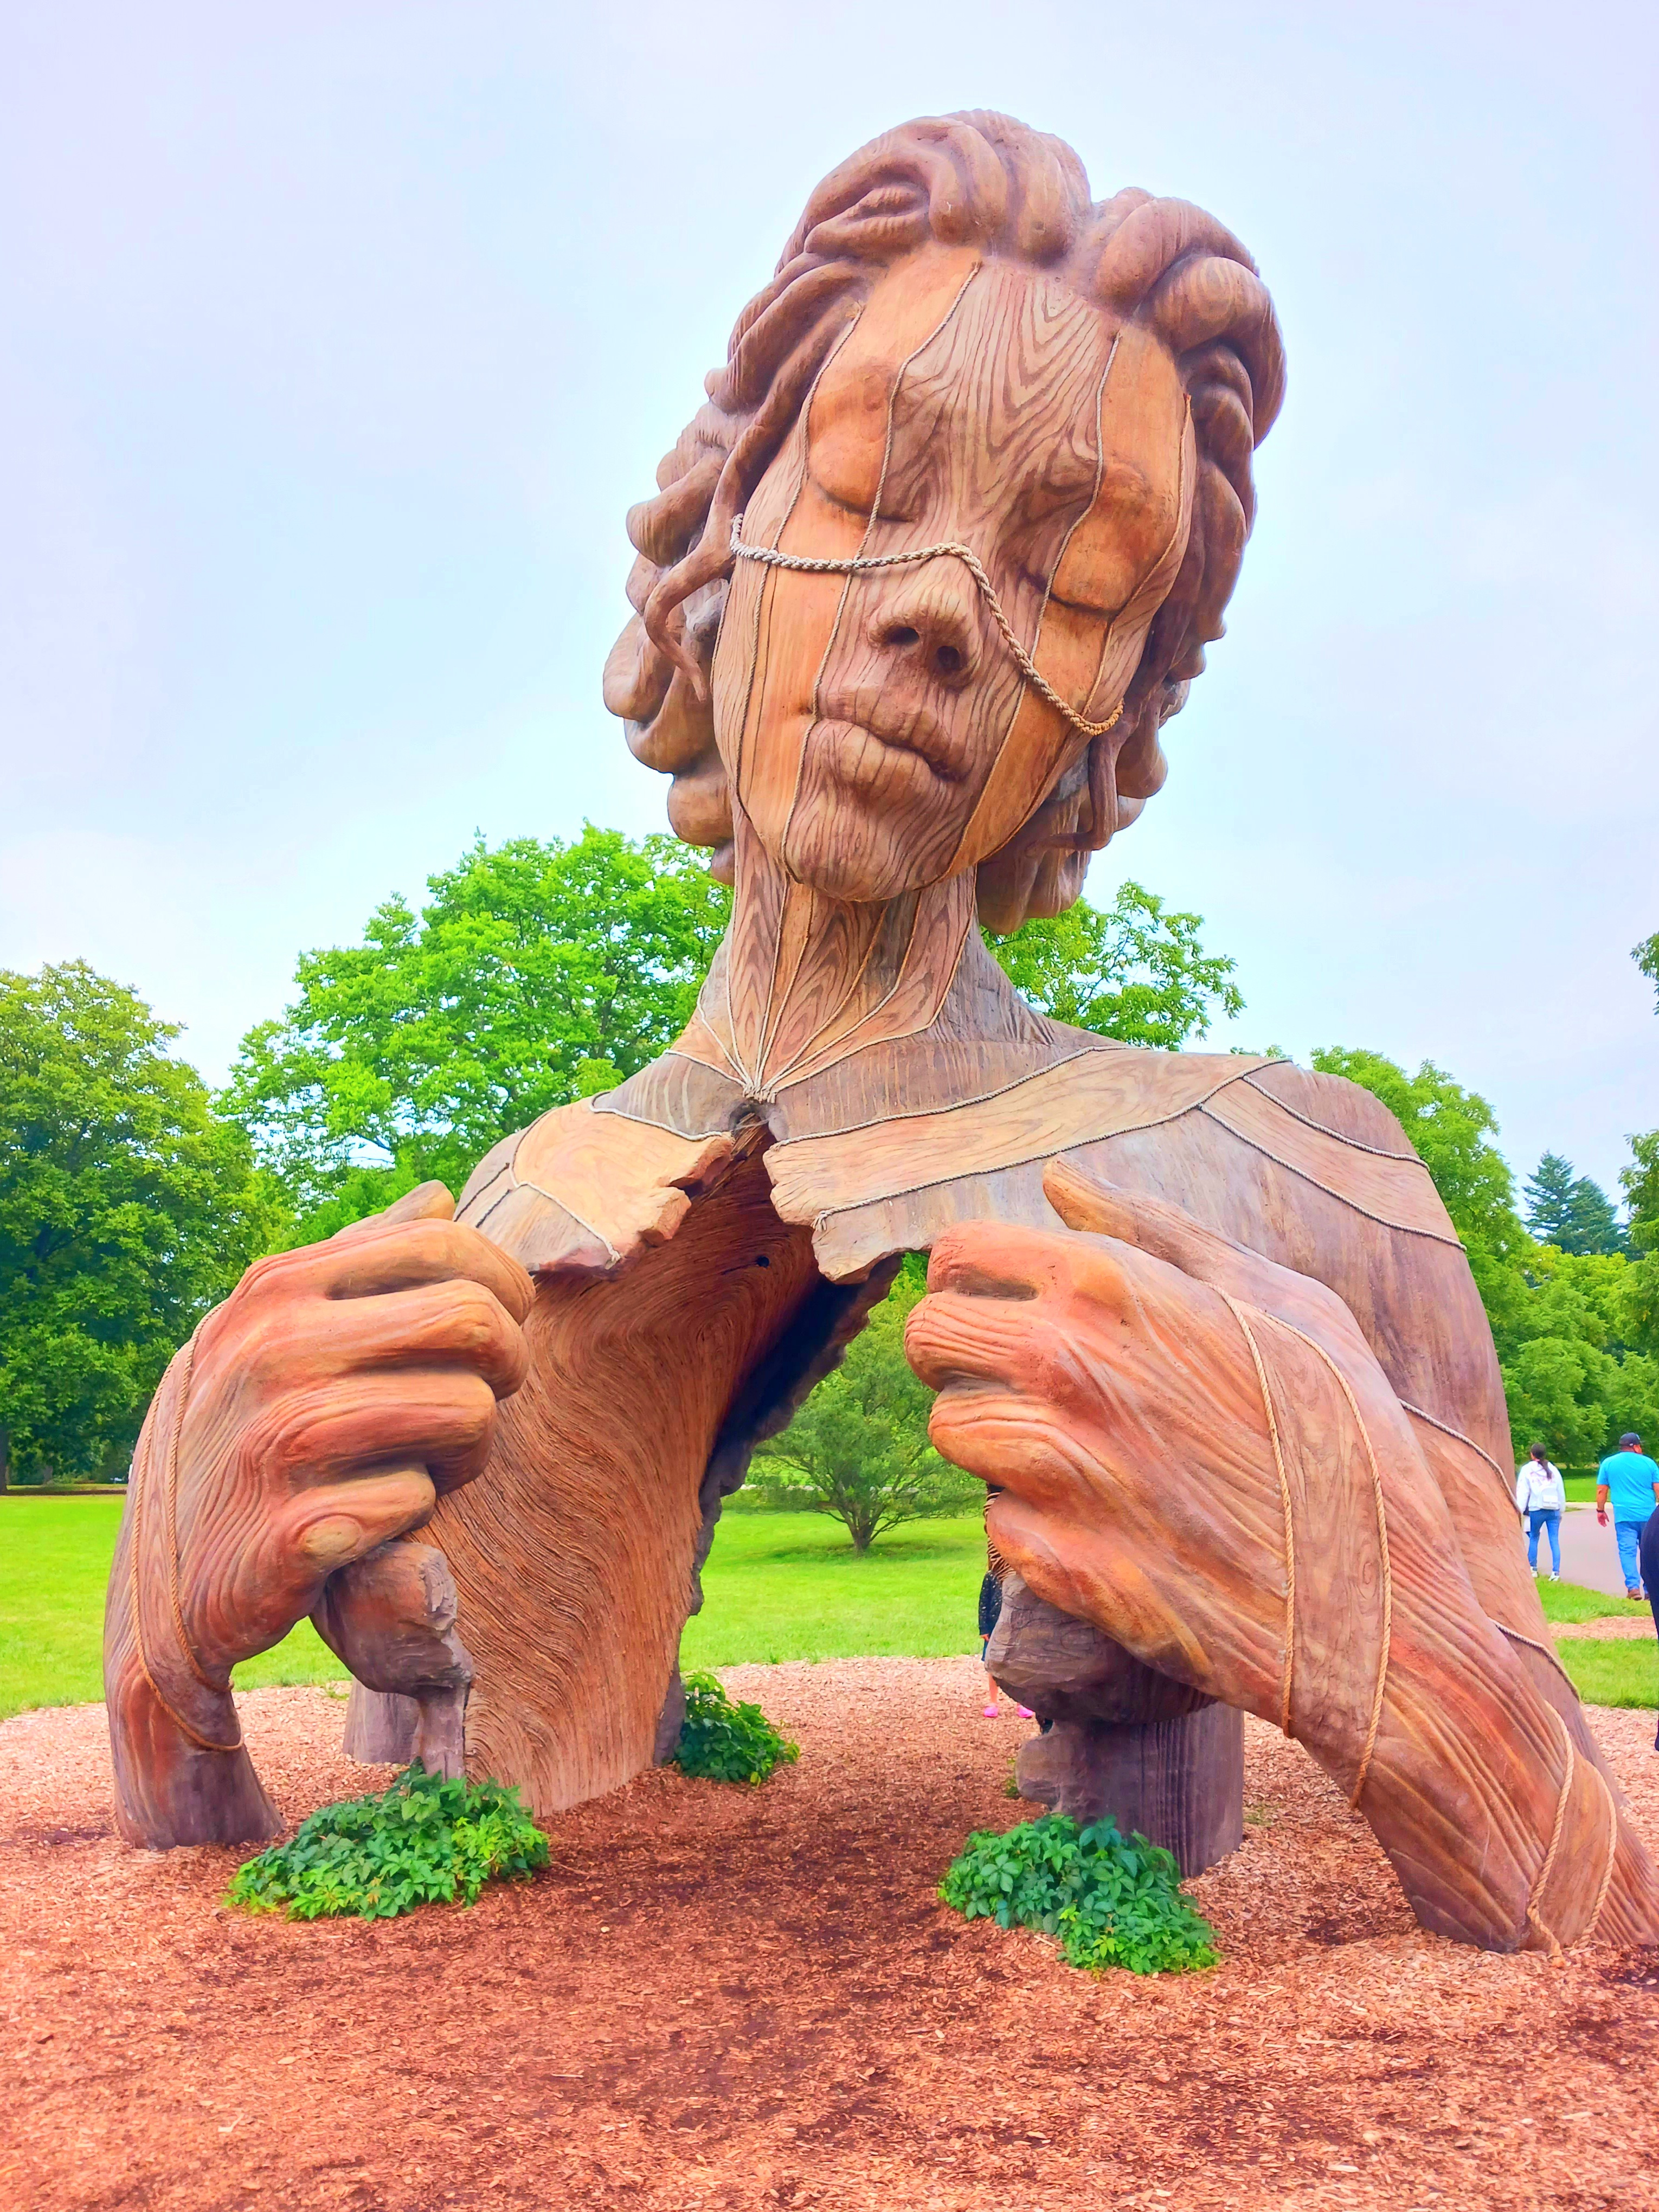 'Hallow'
The Morton Arboretum
Nature and Humanity by Daniel Popper